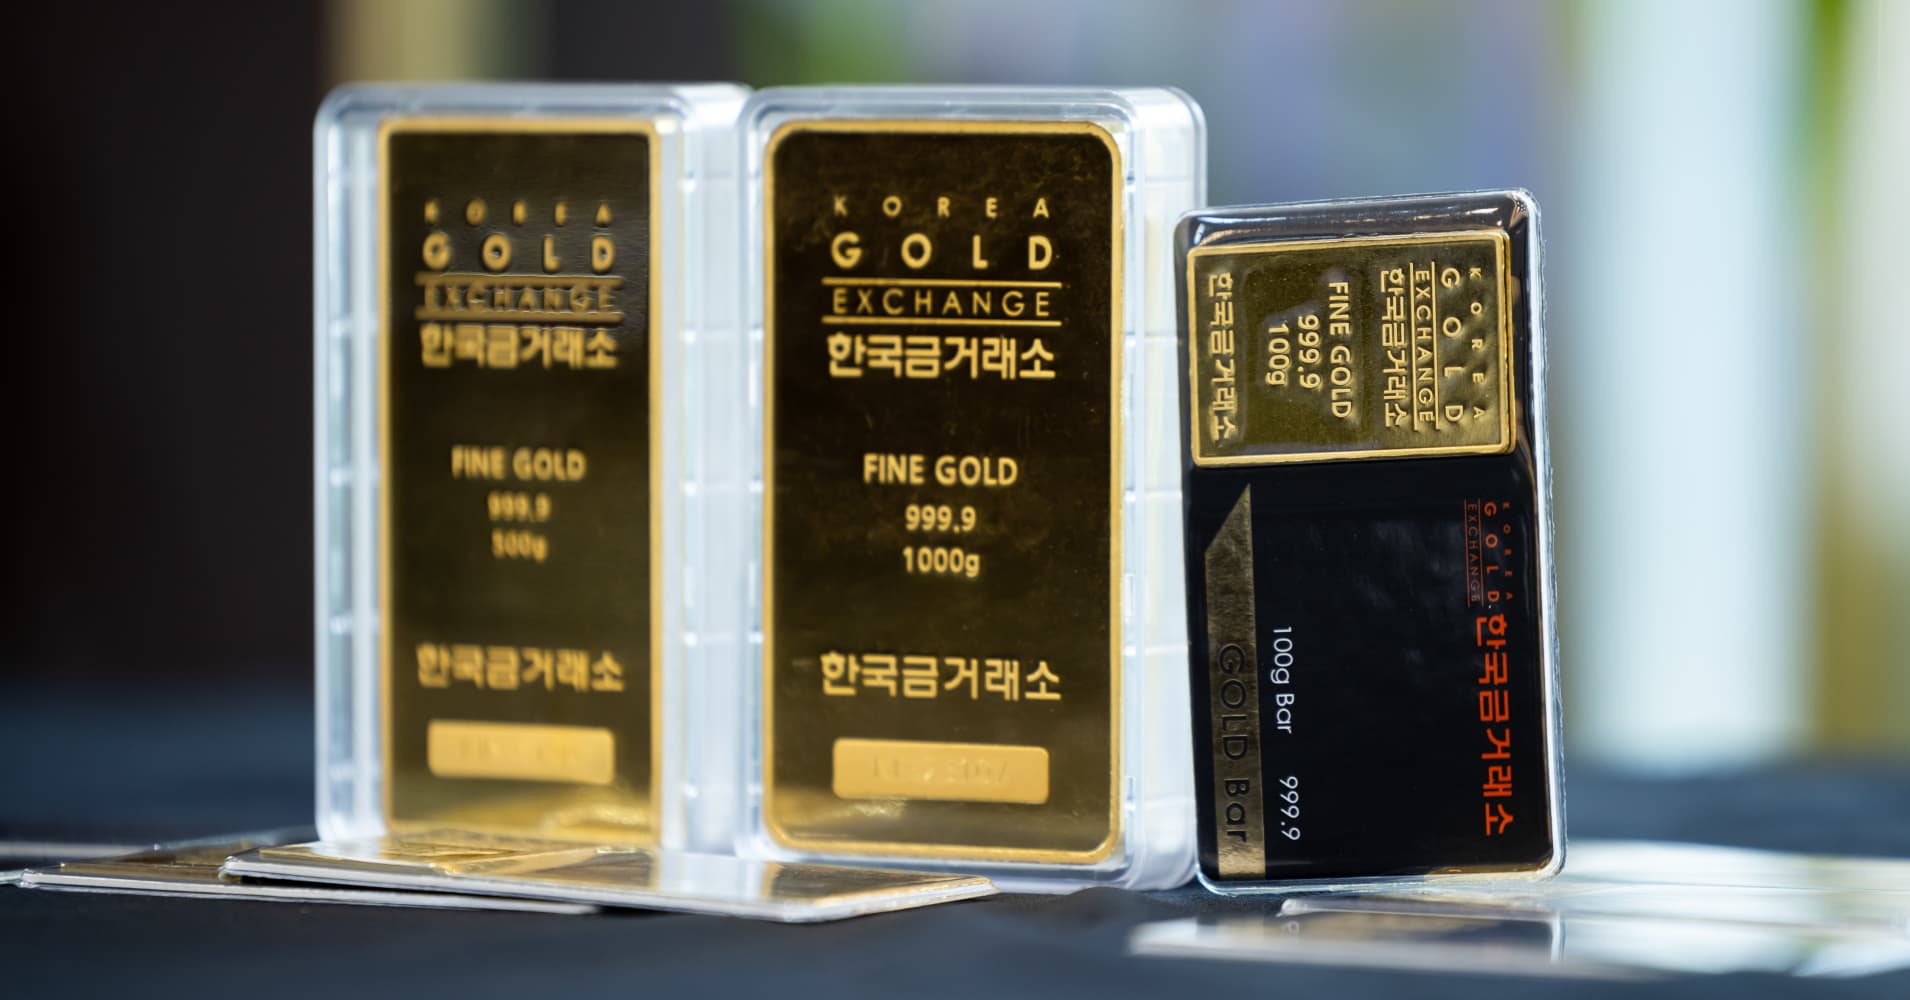 gold bars are selling like hot cakes in korea's convenience stores and vending machines